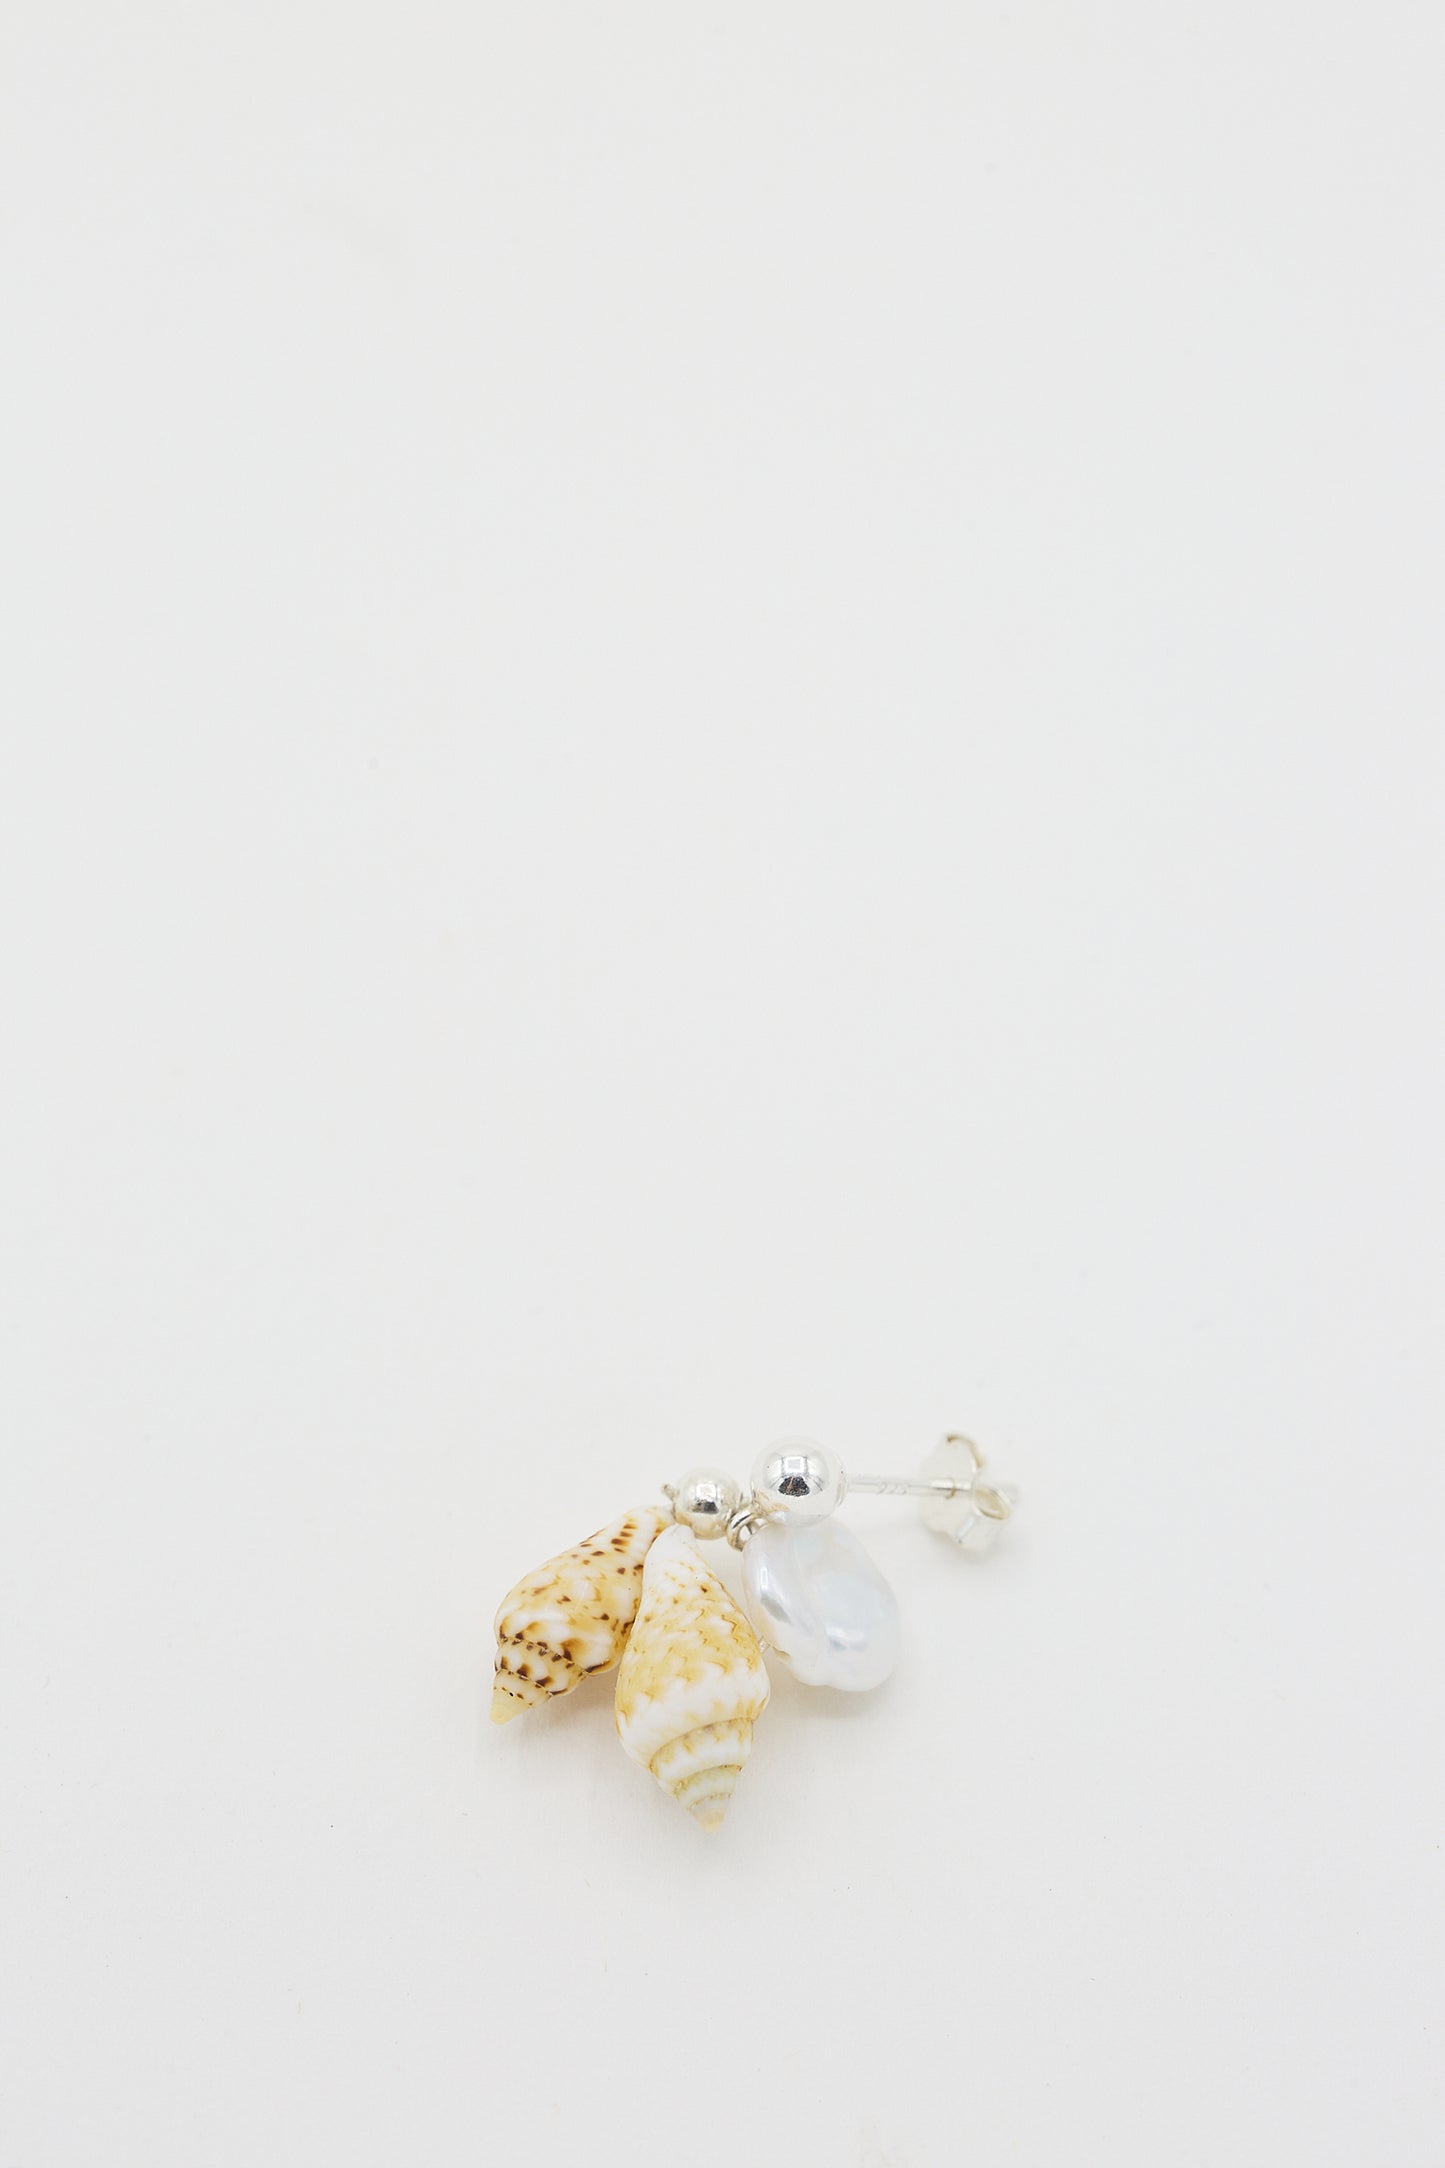 Santangelo Keshi pearl and Double Shell Bebecita Earrings on a white background with sterling silver hardware.